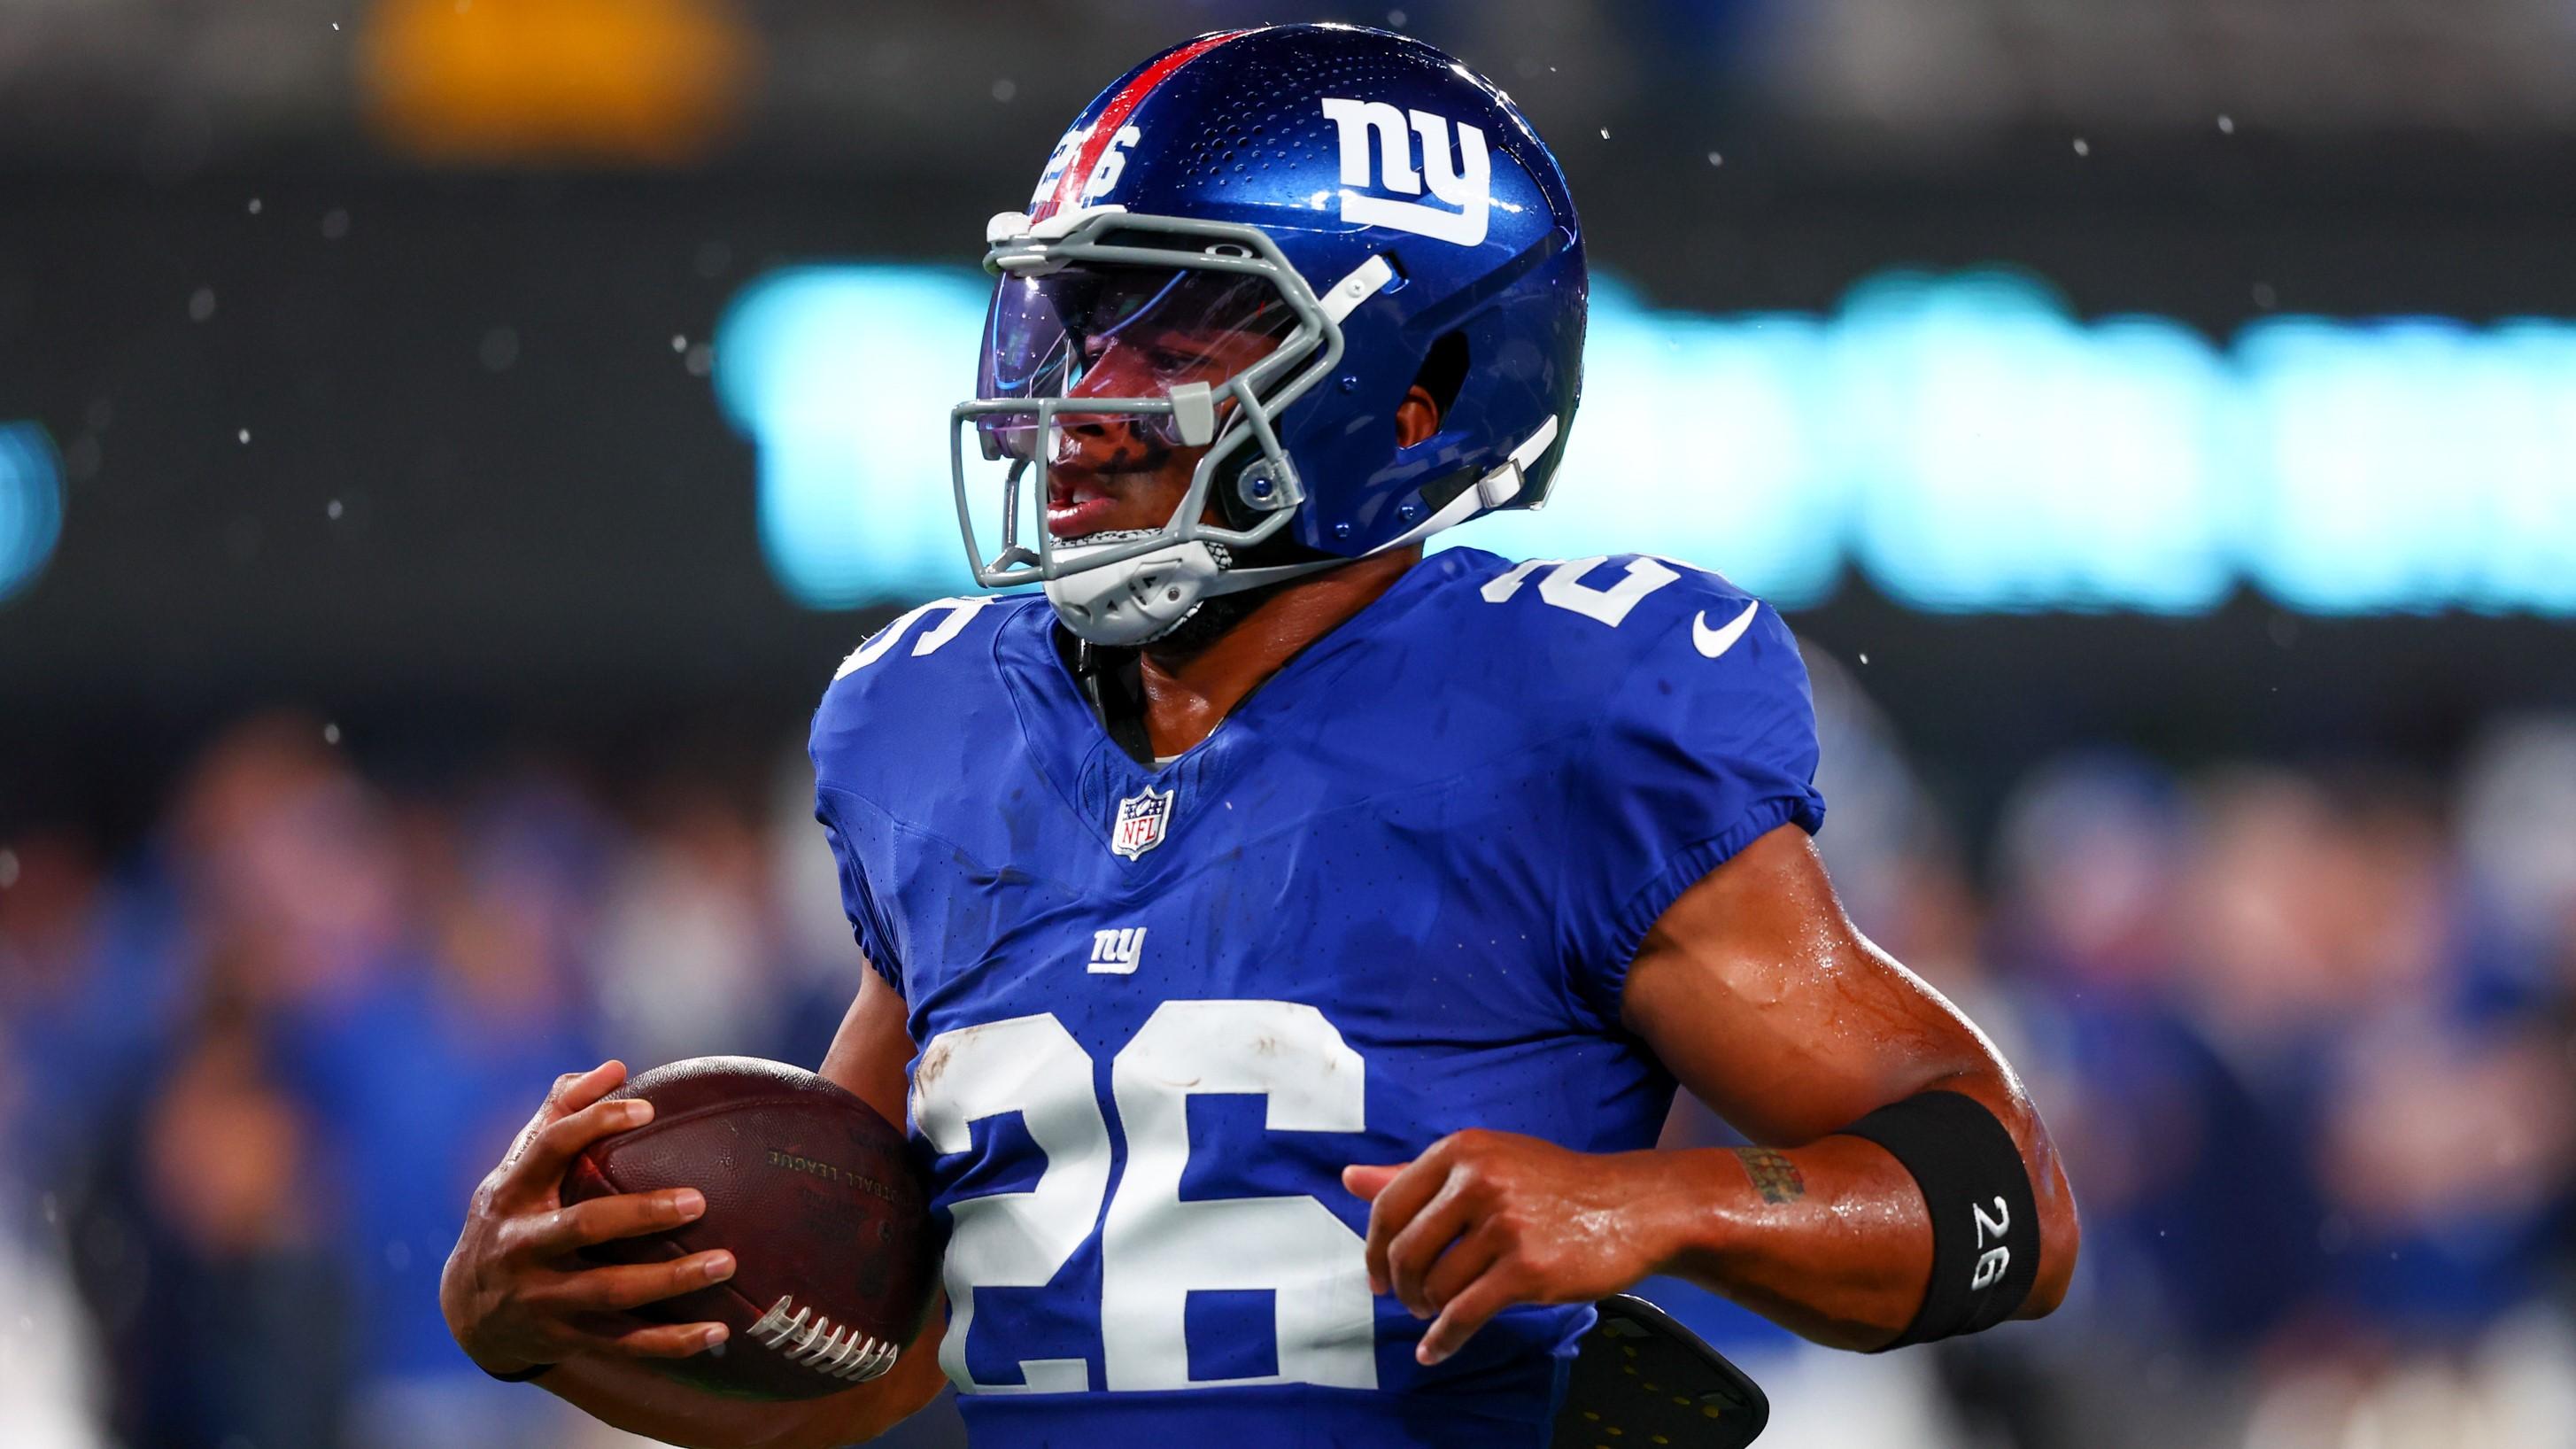 Sep 10, 2023; East Rutherford, New Jersey, USA; New York Giants running back Saquon Barkley (26) runs with the ball during warmups for their game against the Dallas Cowboys at MetLife Stadium. Mandatory Credit: Ed Mulholland-USA TODAY Sports / © Ed Mulholland-USA TODAY Sports